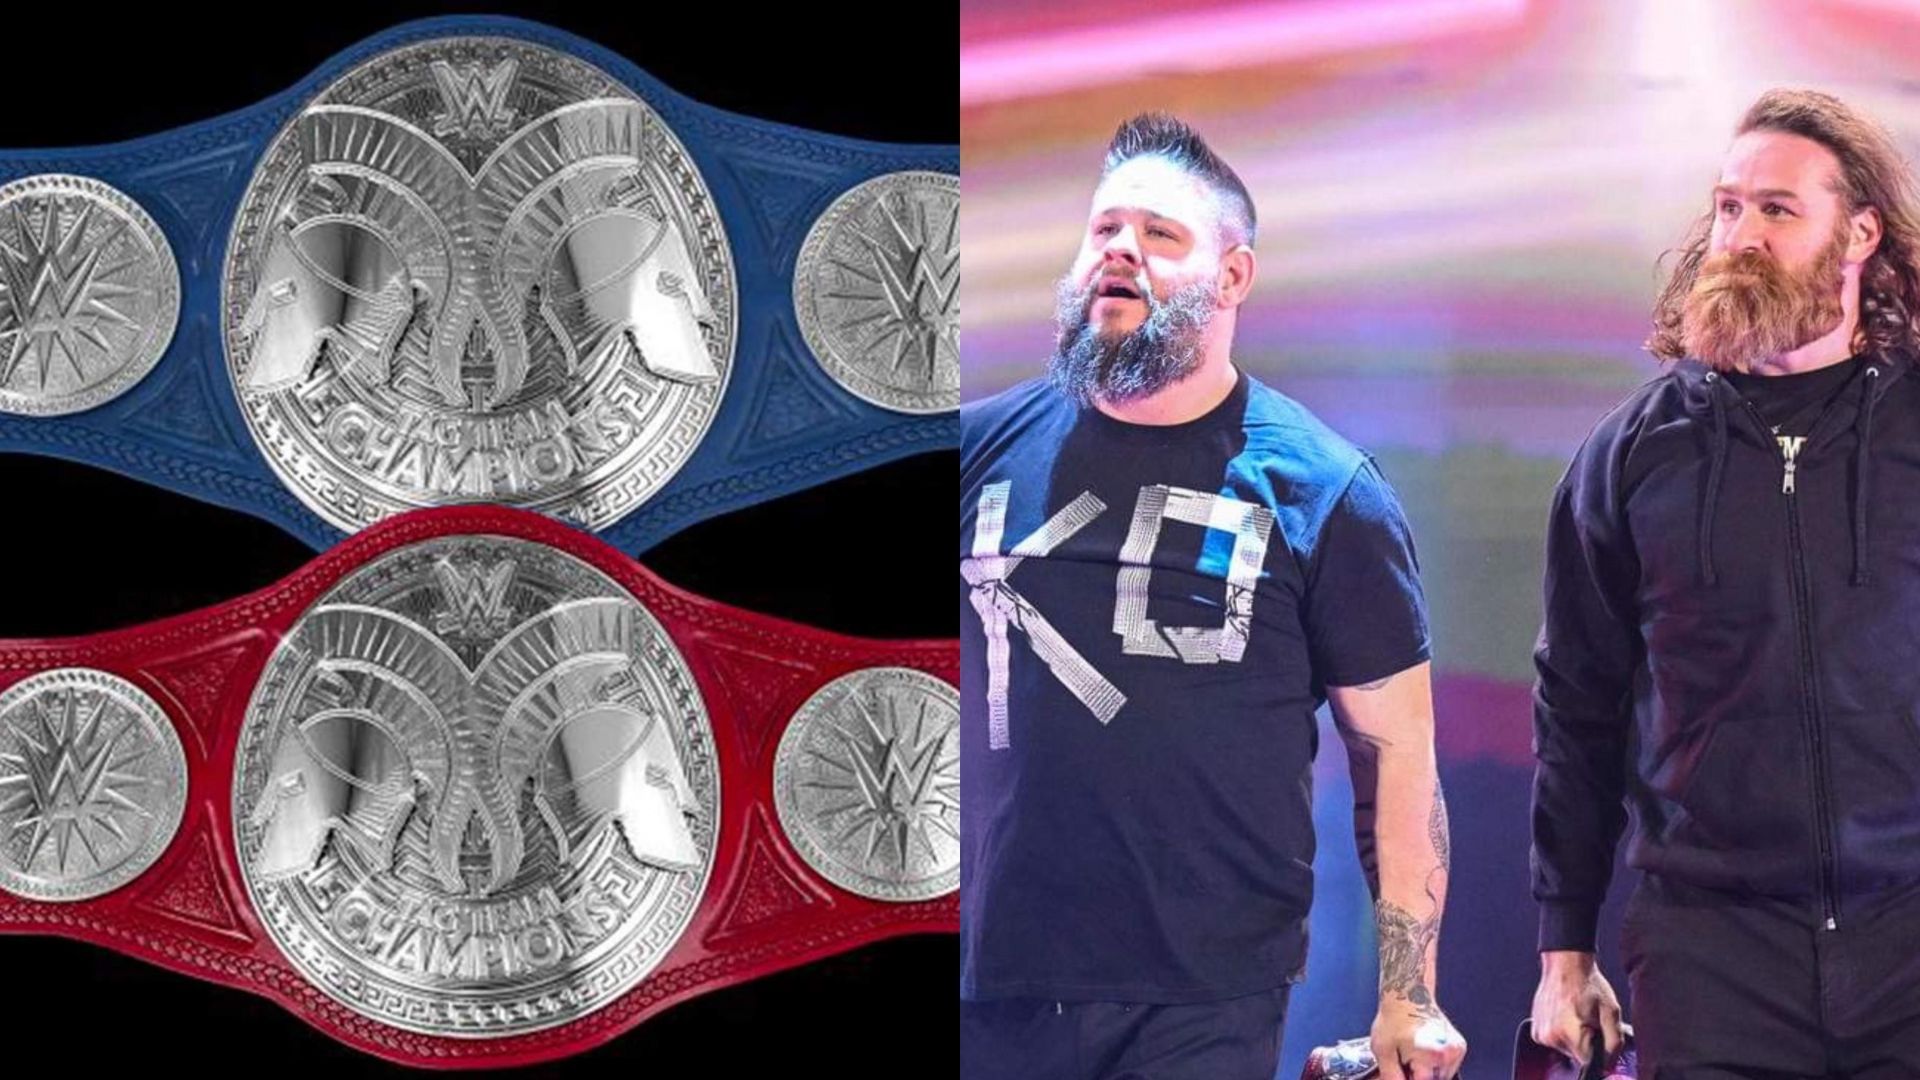 Sami Zayn and Kevin Owens are the current Undisputed WWE Tag Team Champions